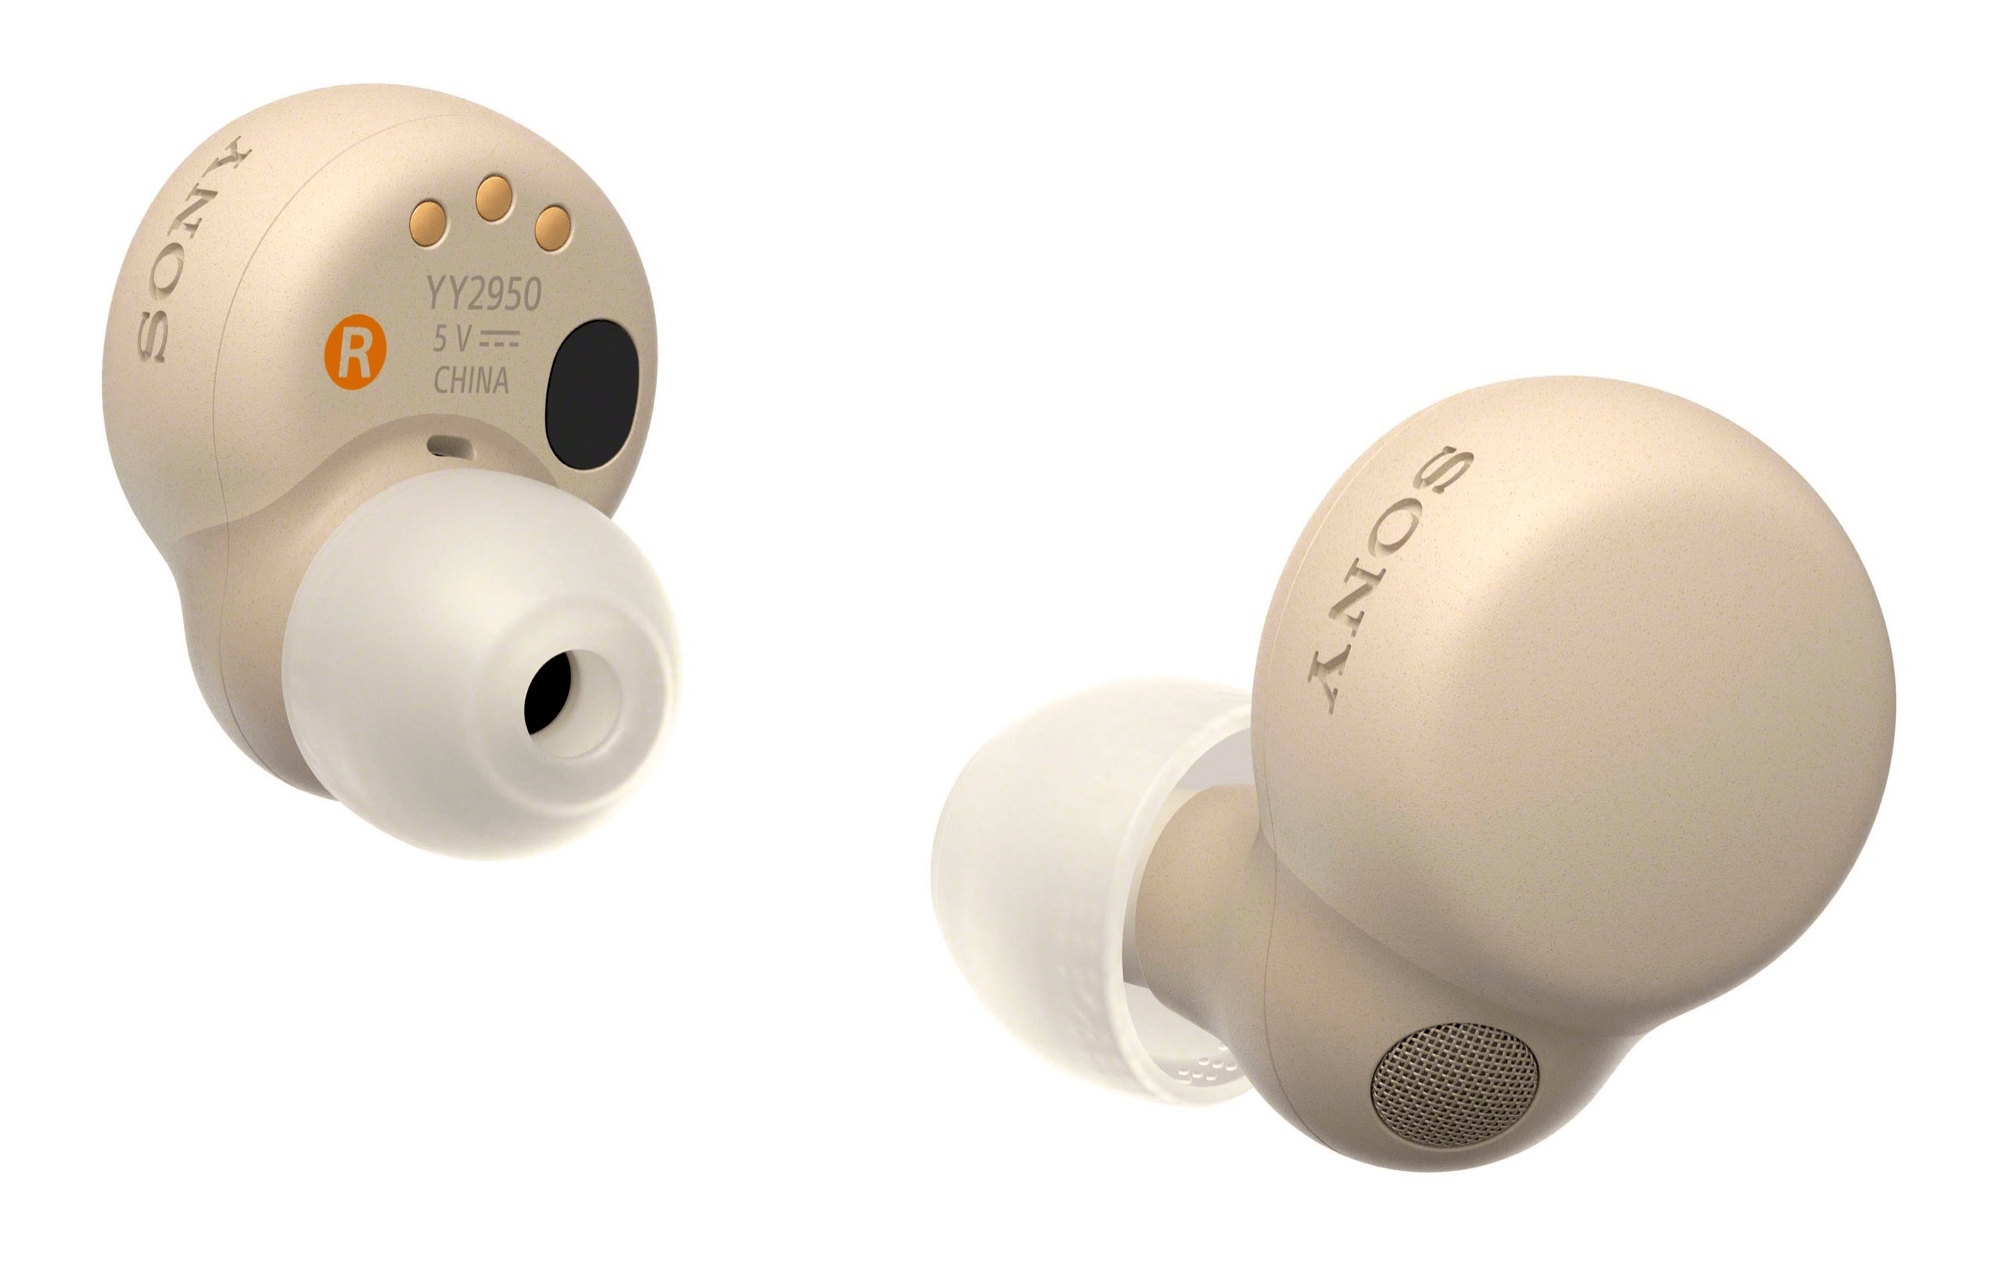 Sony to release LinkBuds S TWS headphones with ANC support and price of 199 euros